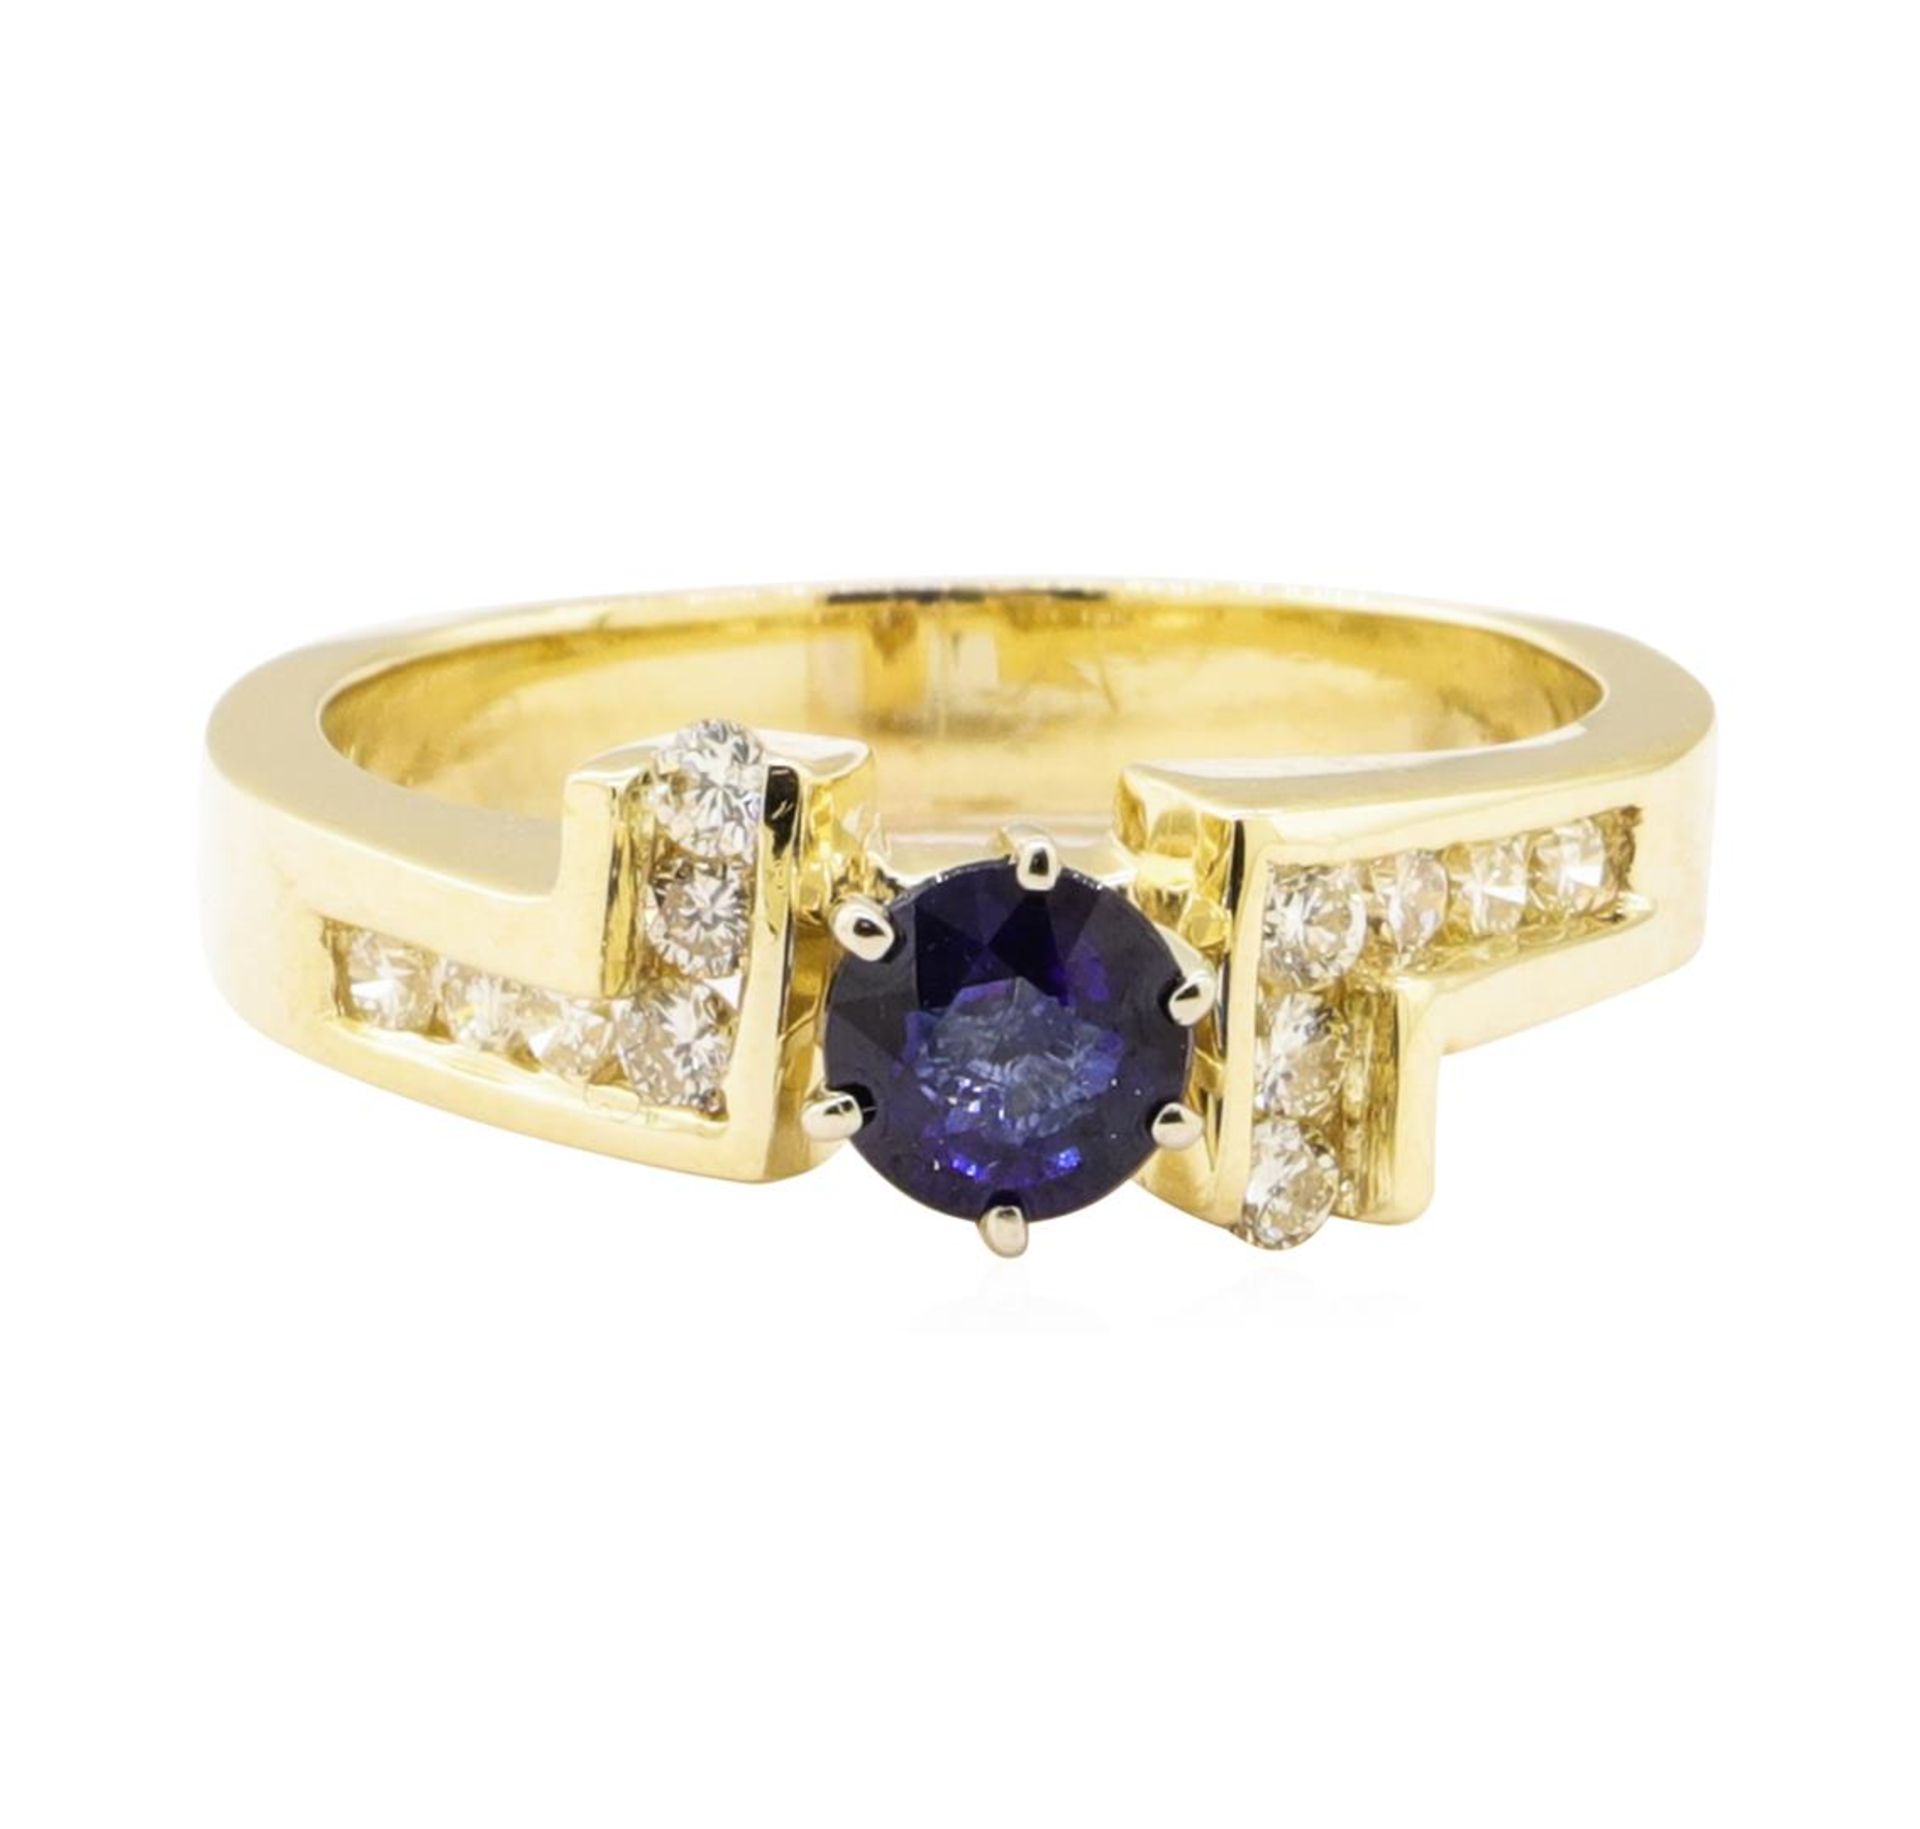 1.00 ctw Blue Sapphire and Diamond Ring - 14KT Yellow Gold - Image 2 of 4